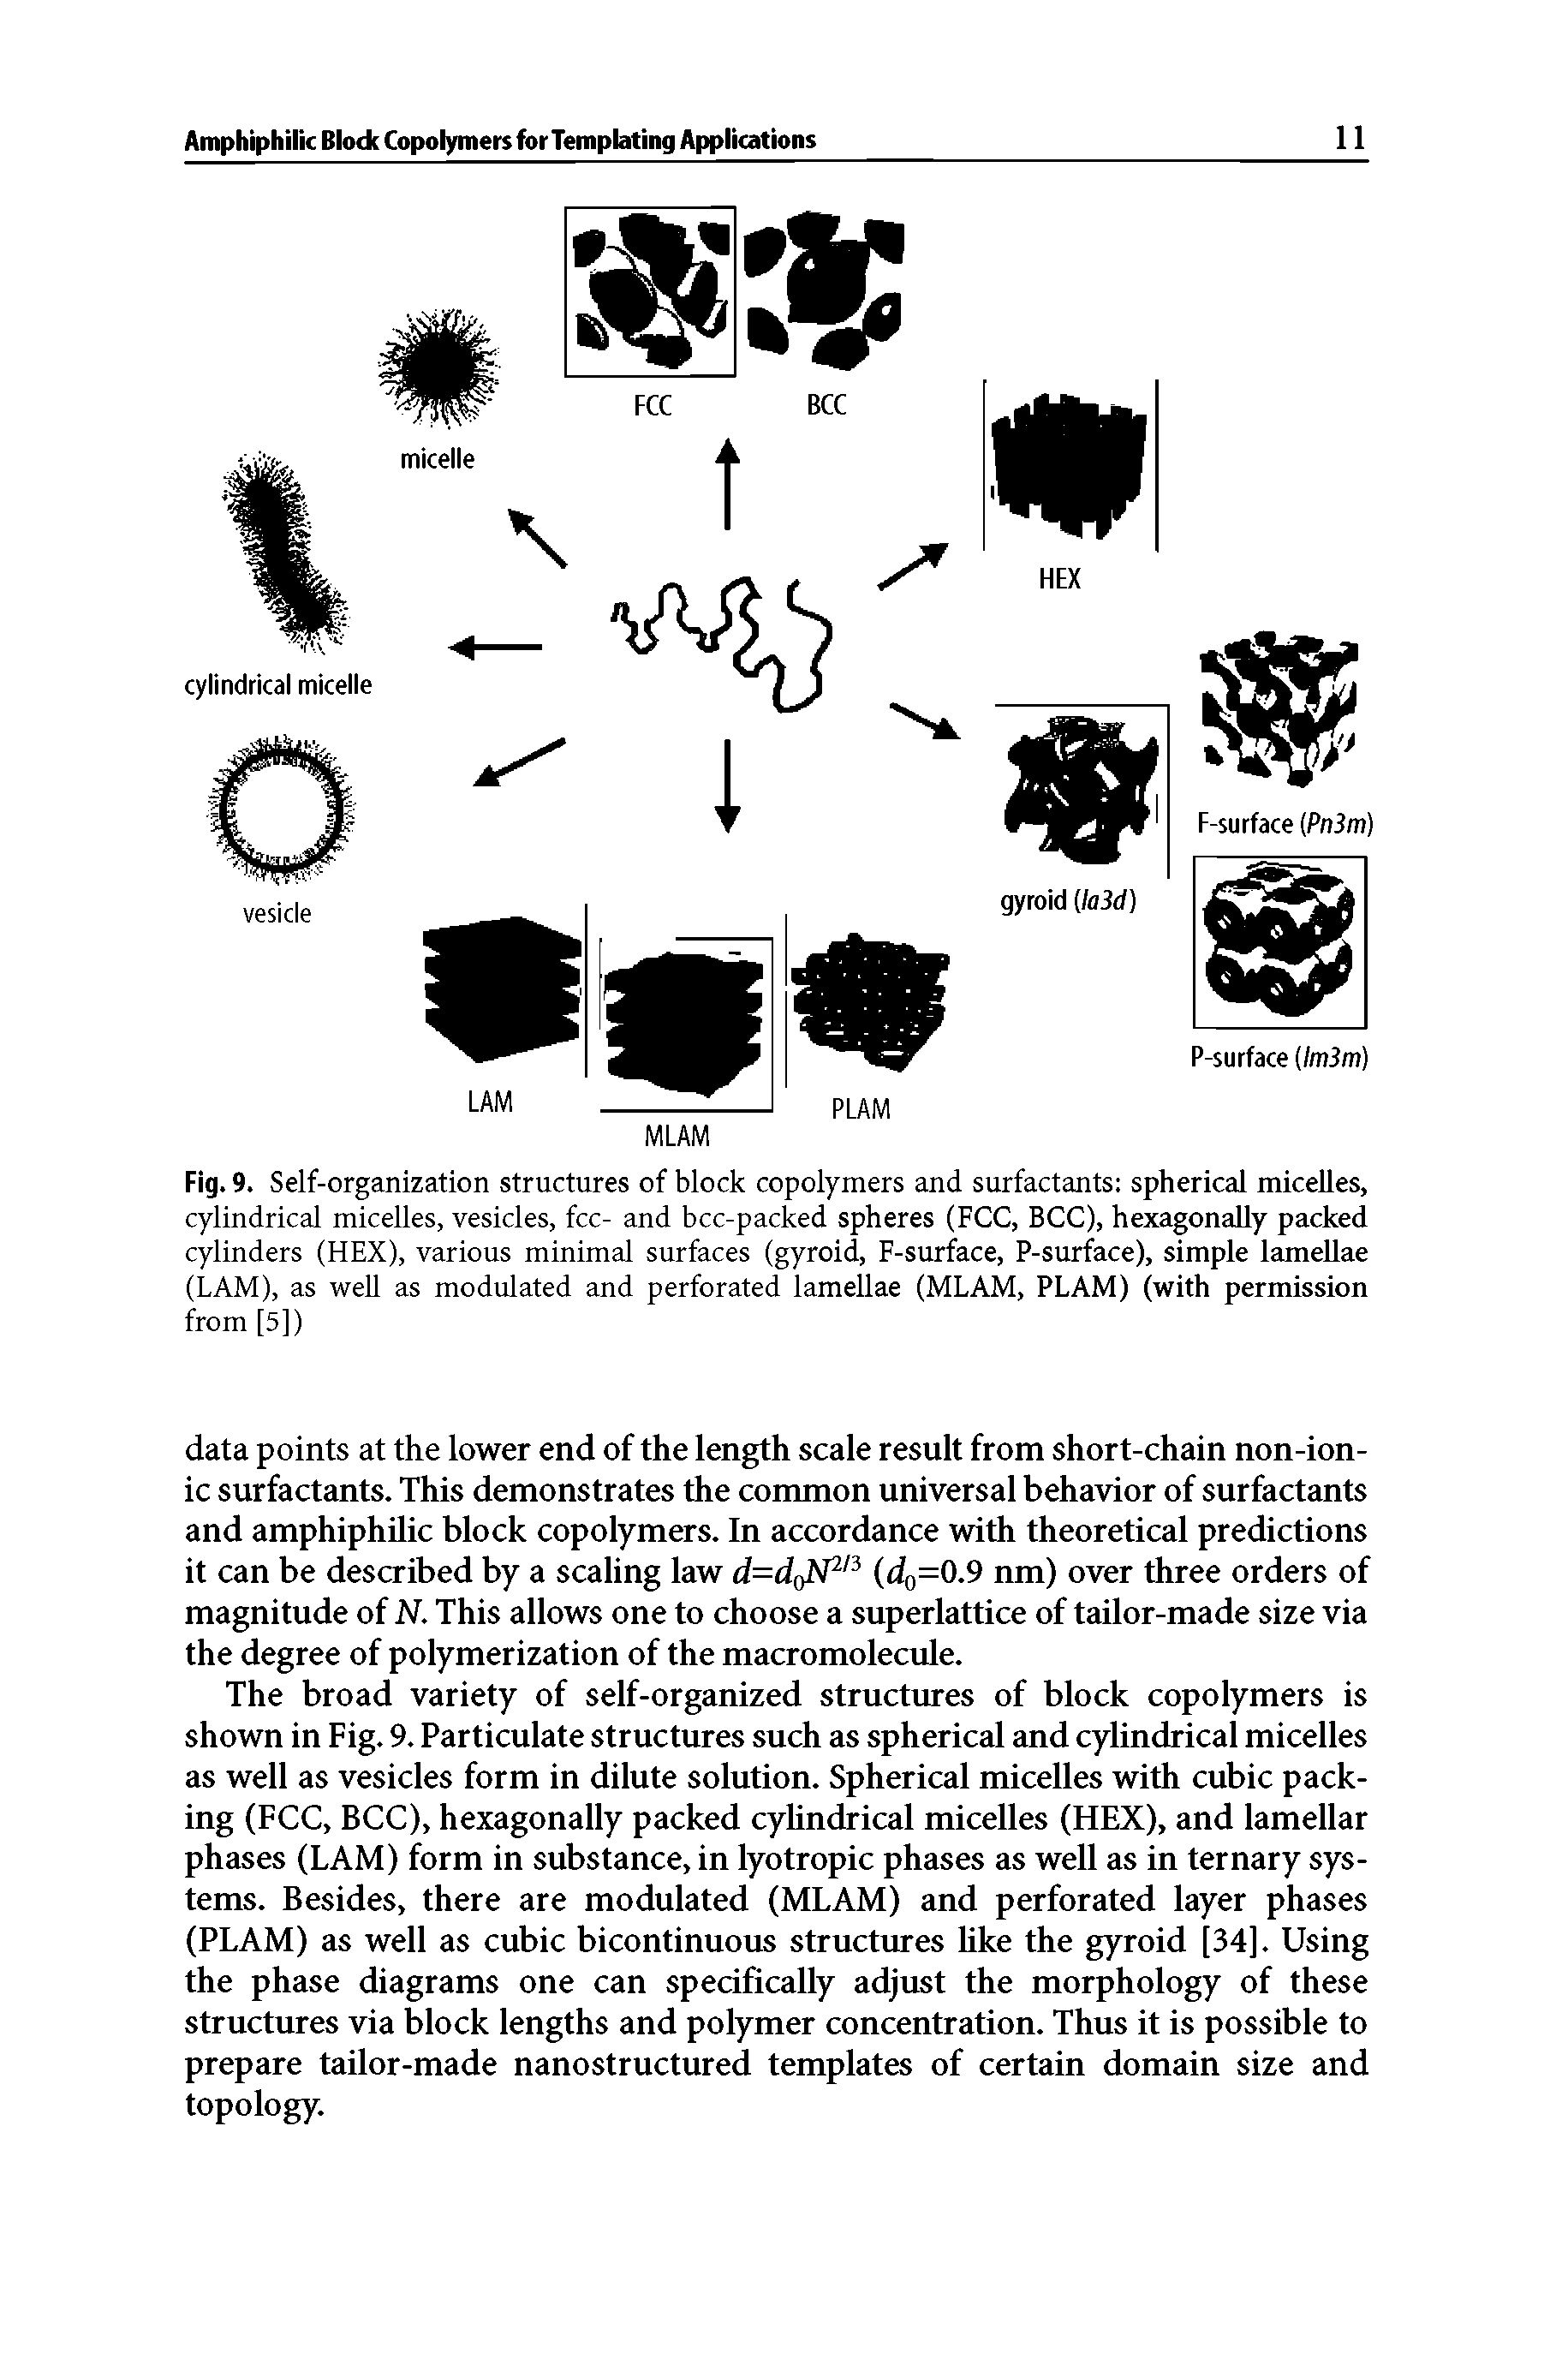 Fig. 9. Self-organization structures of block copolymers and surfactants spherical micelles, cylindrical micelles, vesicles, fee- and bcc-packed spheres (FCC, BCC), hexagonaUy packed cylinders (HEX), various minimal surfaces (gyroid, F-surface, P-surface), simple lamellae (LAM), as well as modulated and perforated lamellae (MLAM, PLAM) (with permission from [5])...